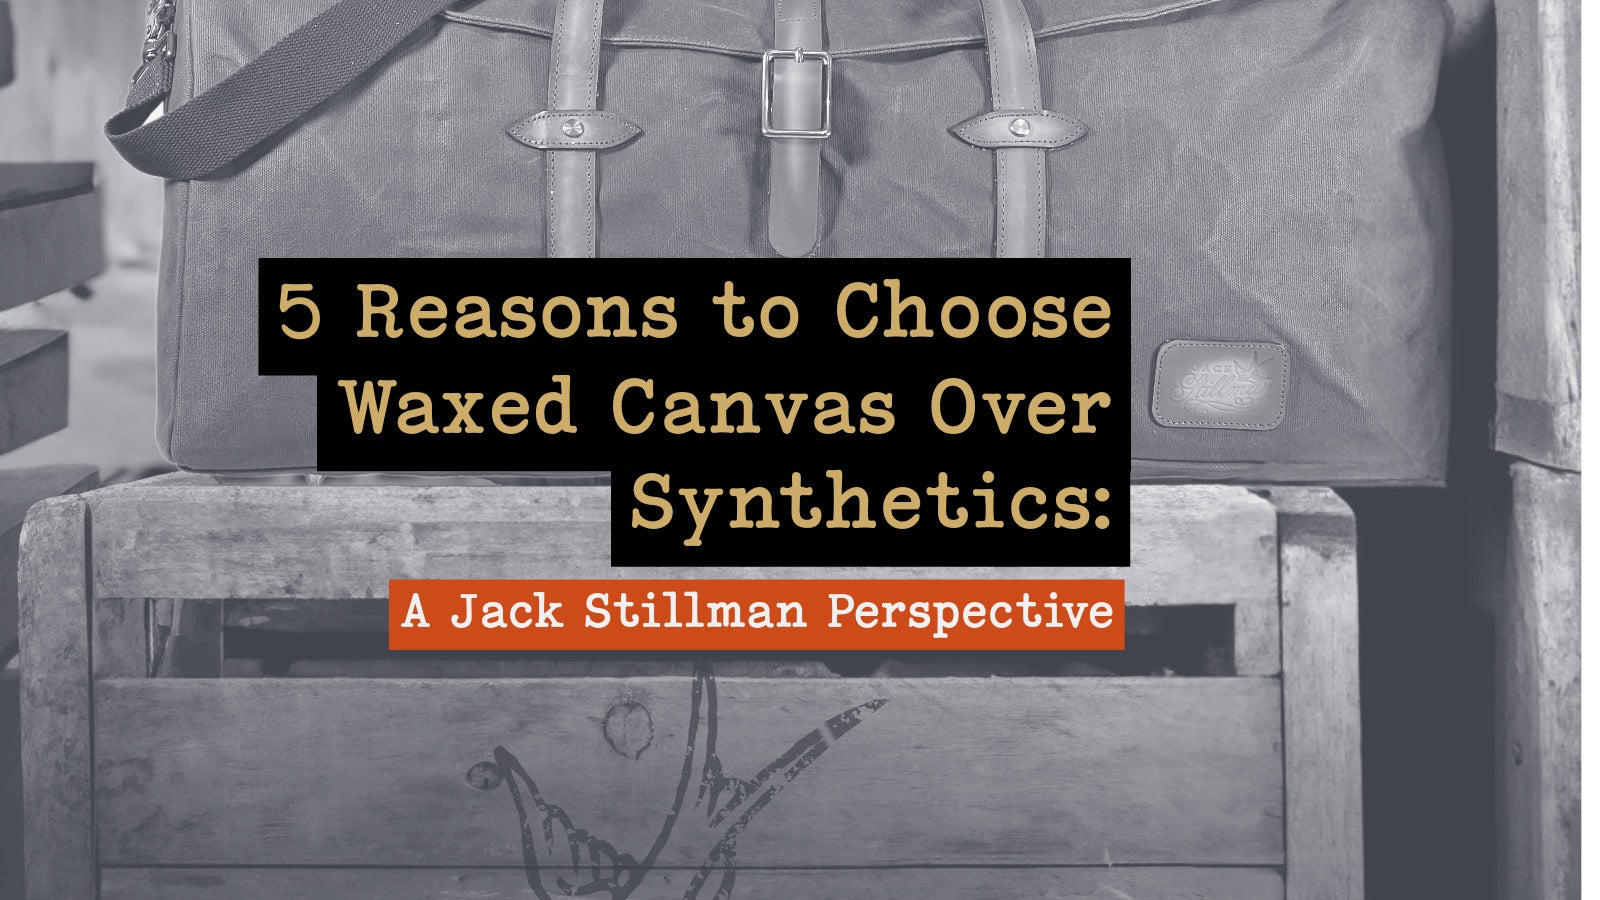 5 Reasons to Choose Waxed Canvas Over Synthetics: A Jack Stillman Perspective